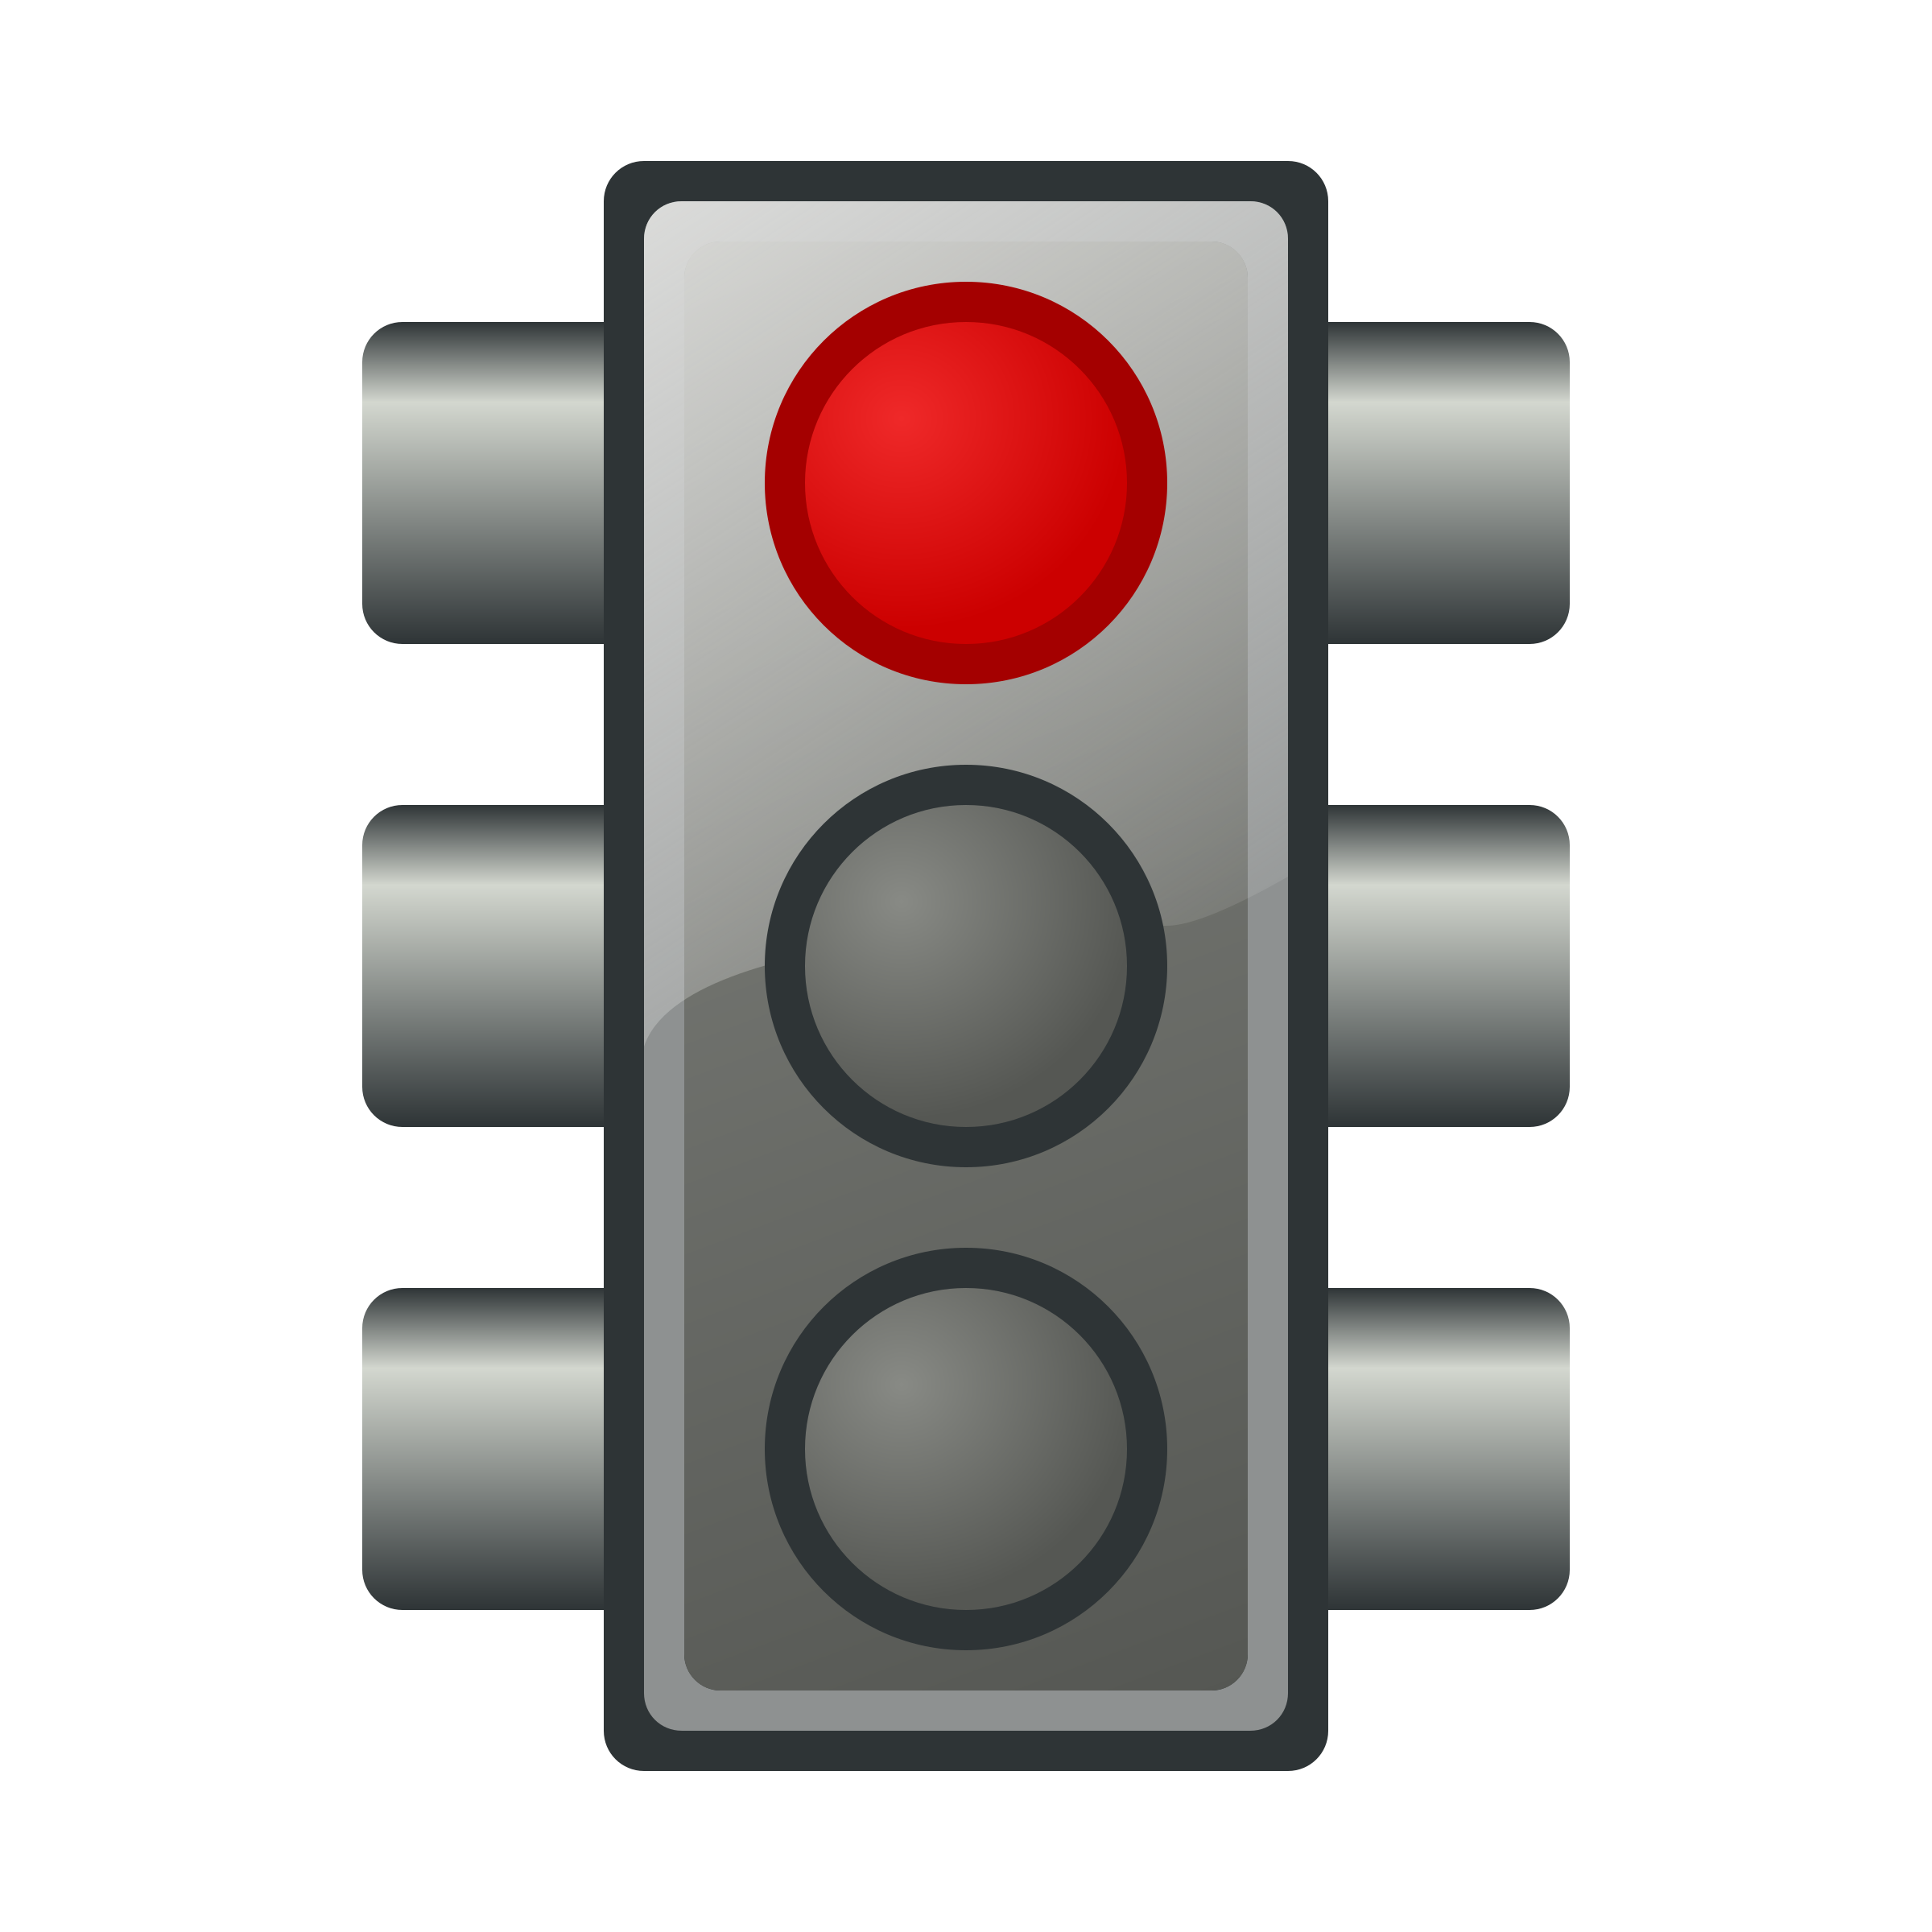 Red traffic light Icons PNG - Free PNG and Icons Downloads